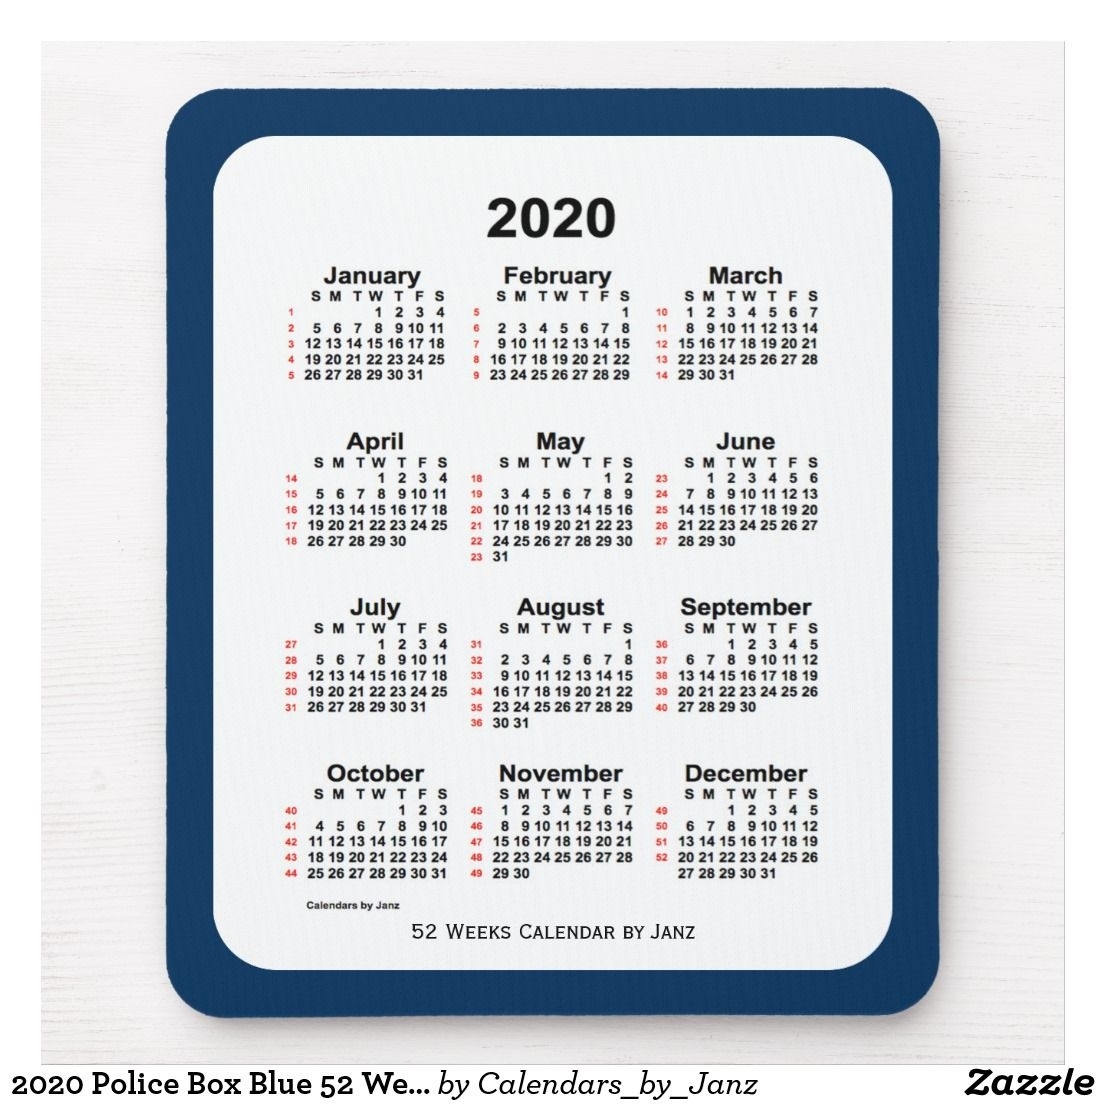 2020 Police Box Blue 52 Week Calendar By Janz Mouse Pad Incredible 2020 Calendar With Date Boxes And Holidays